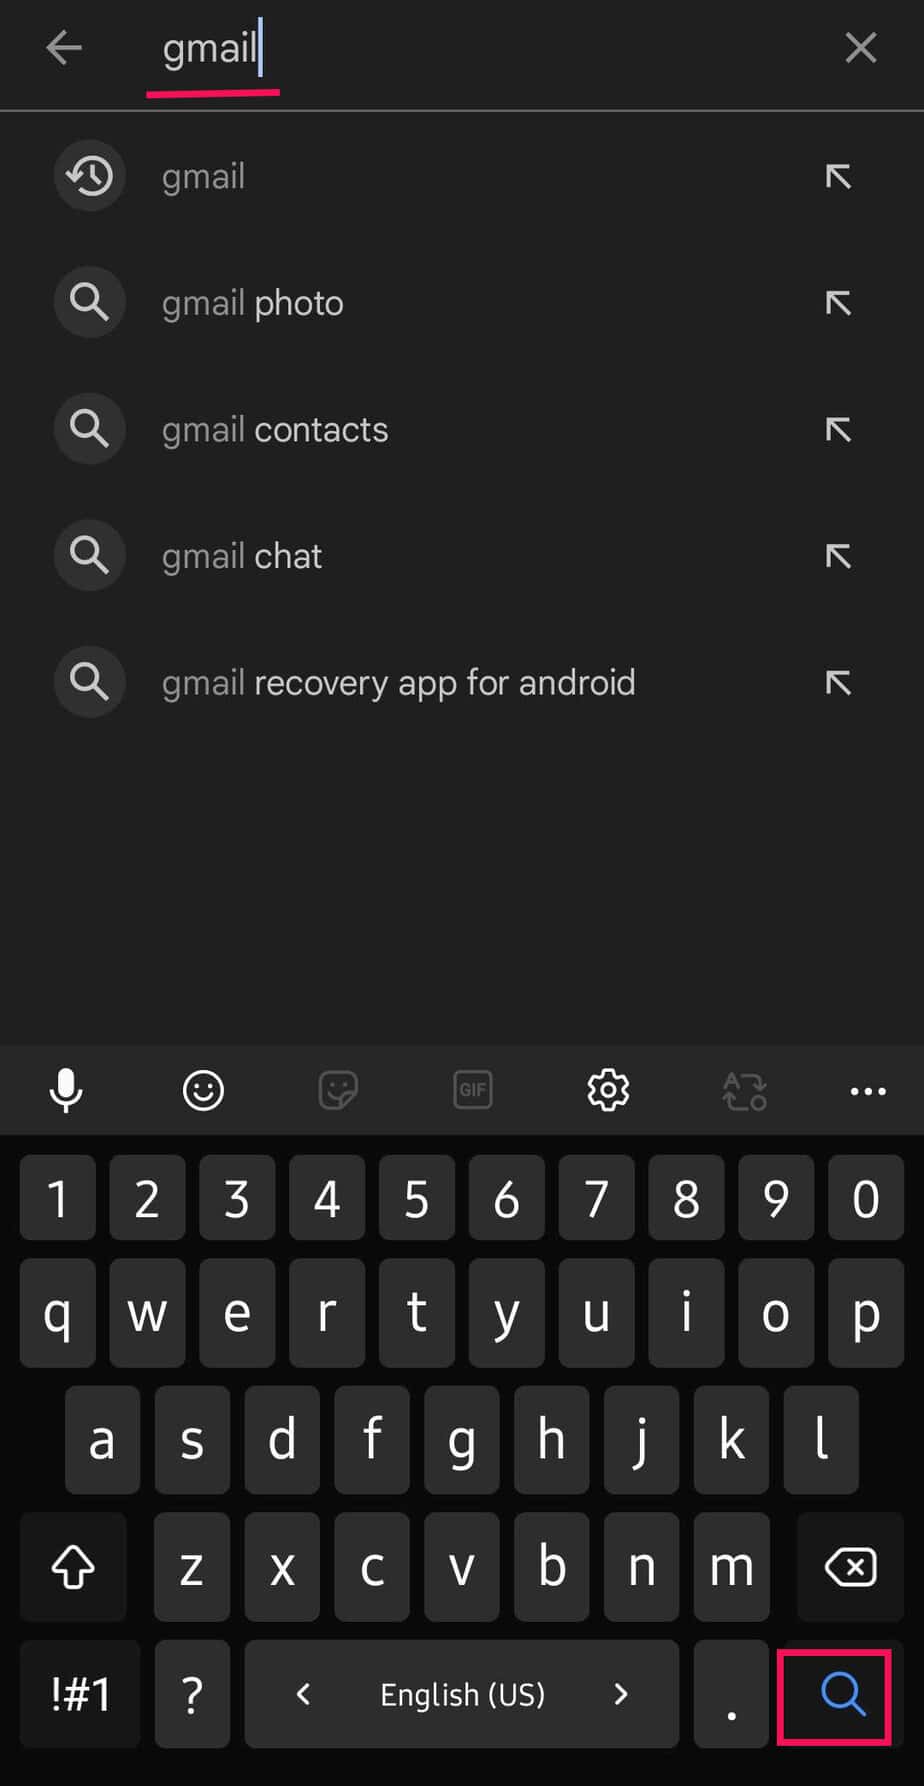 type-gmail-and-tap-on-search-icon